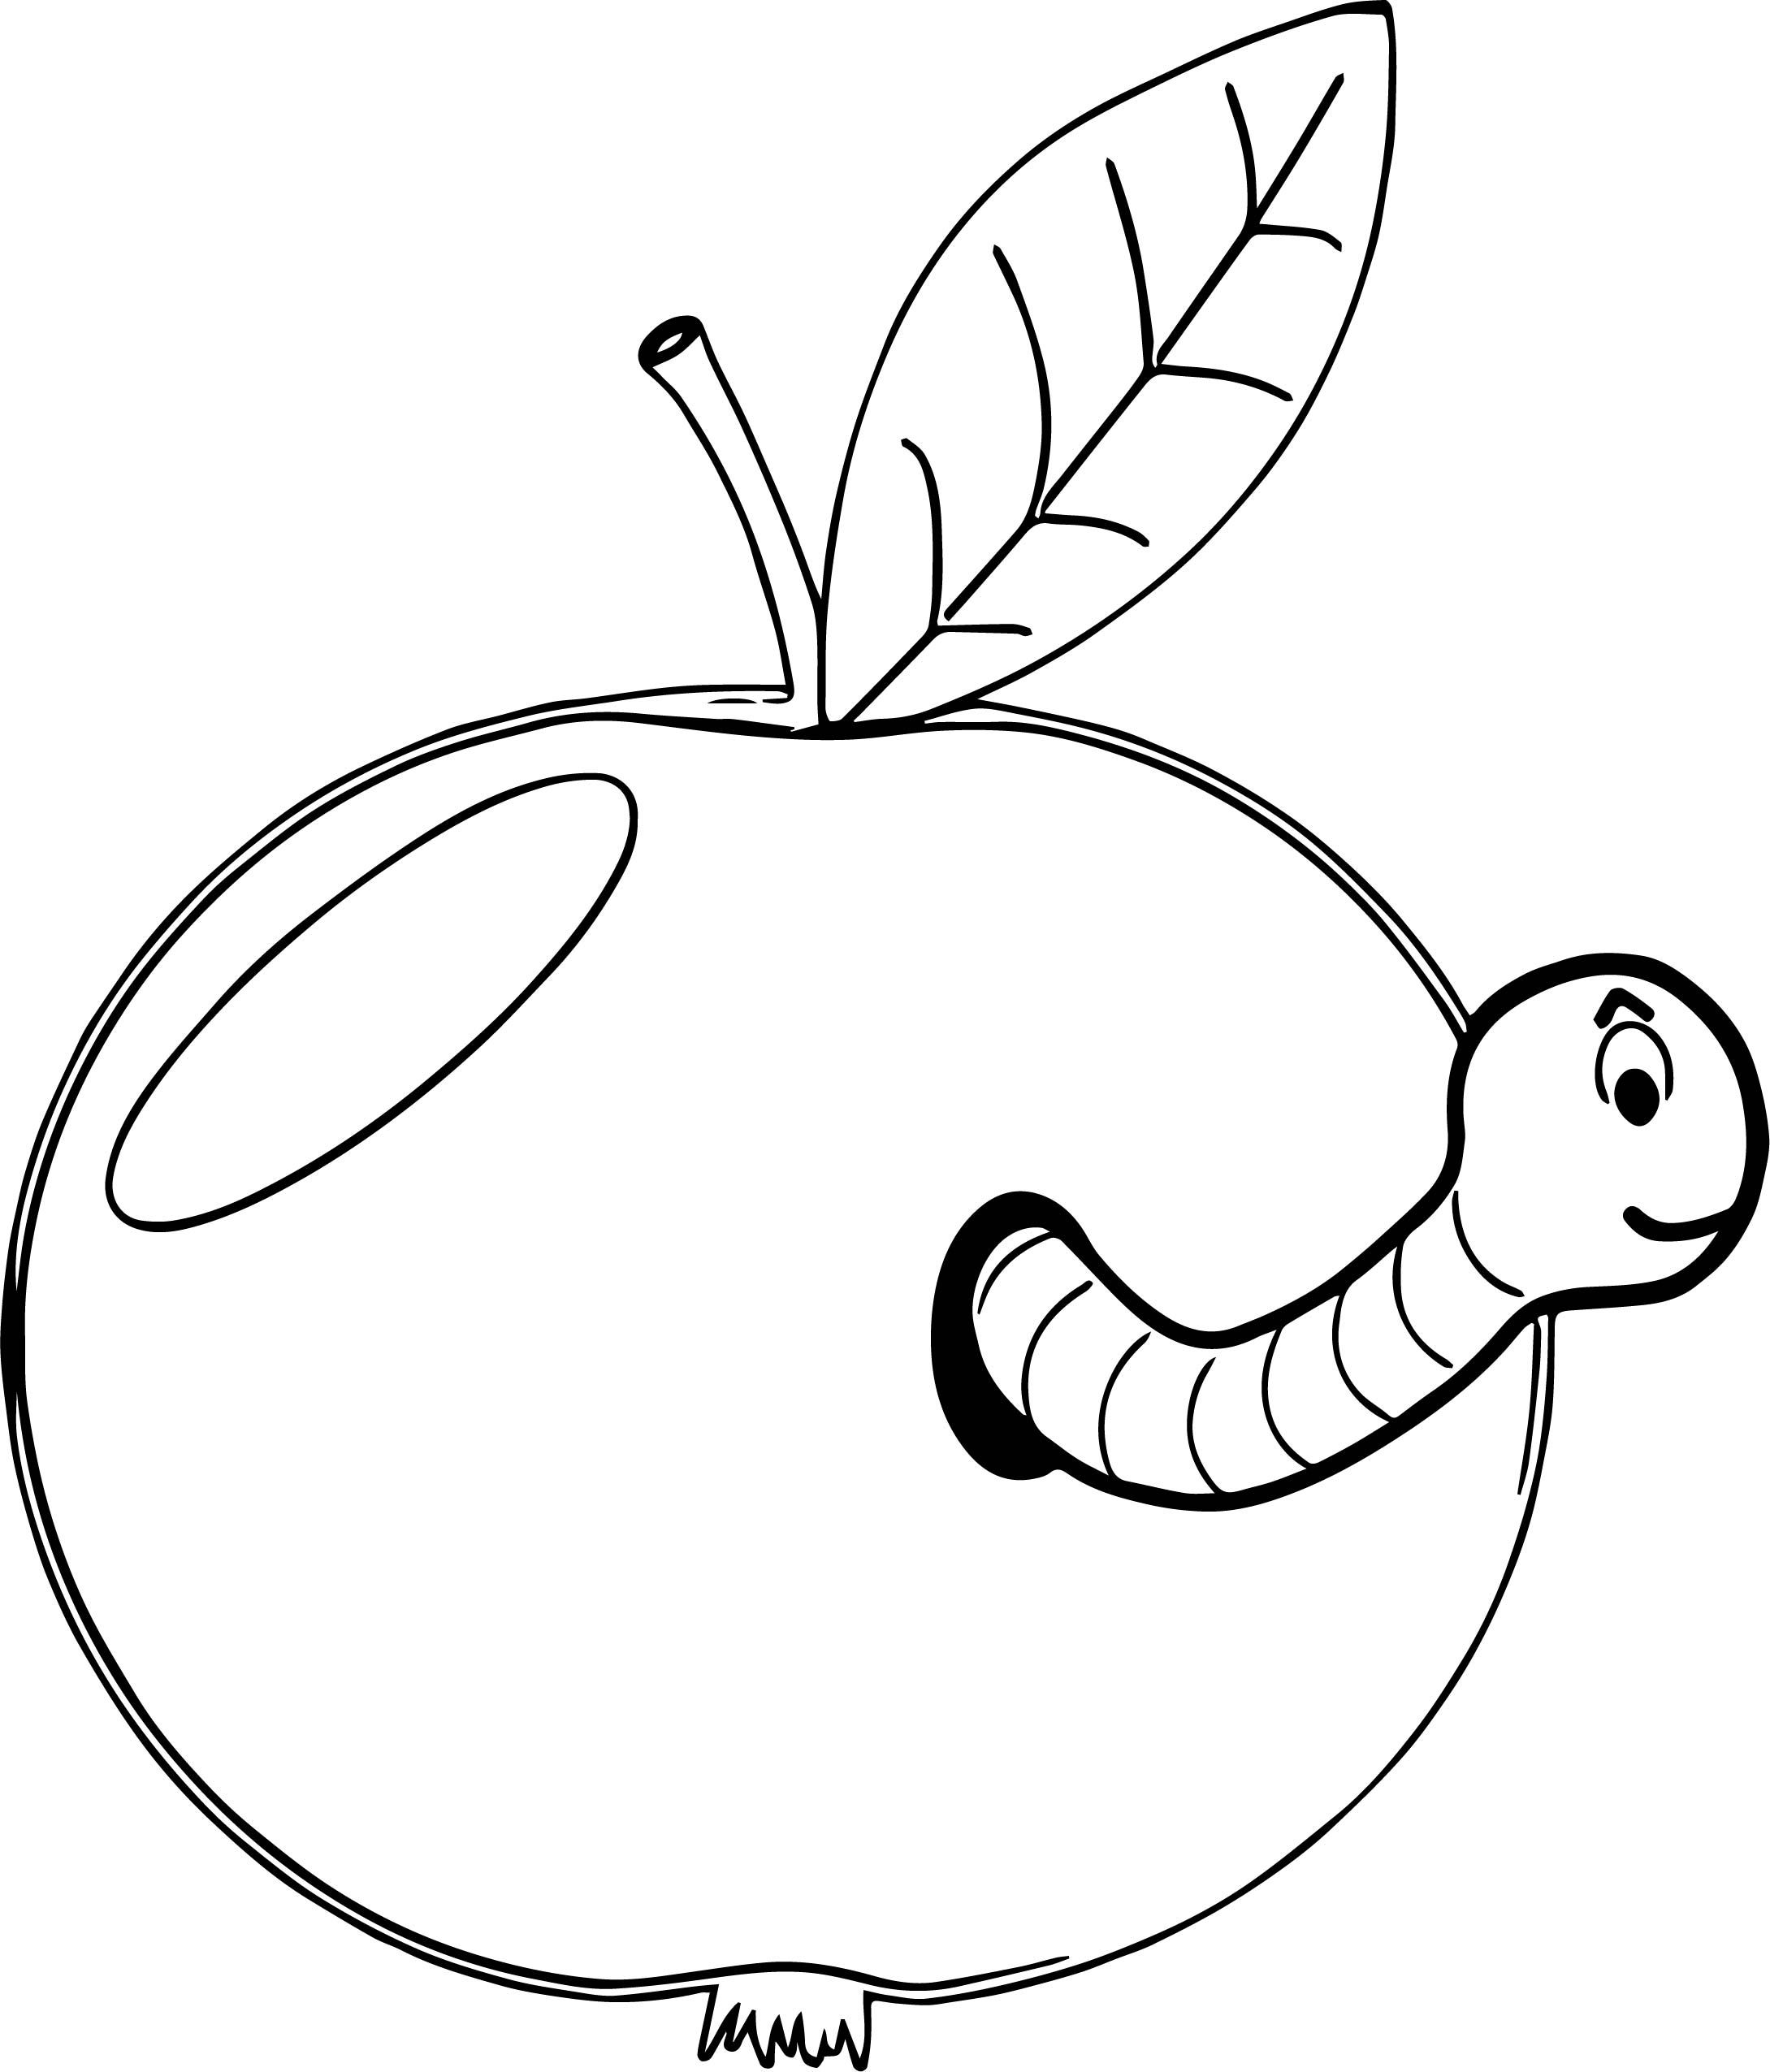 Apple And Worm Coloring Page - Wecoloringpage.com | Coloring pages, Free  printable coloring sheets, Free printable coloring